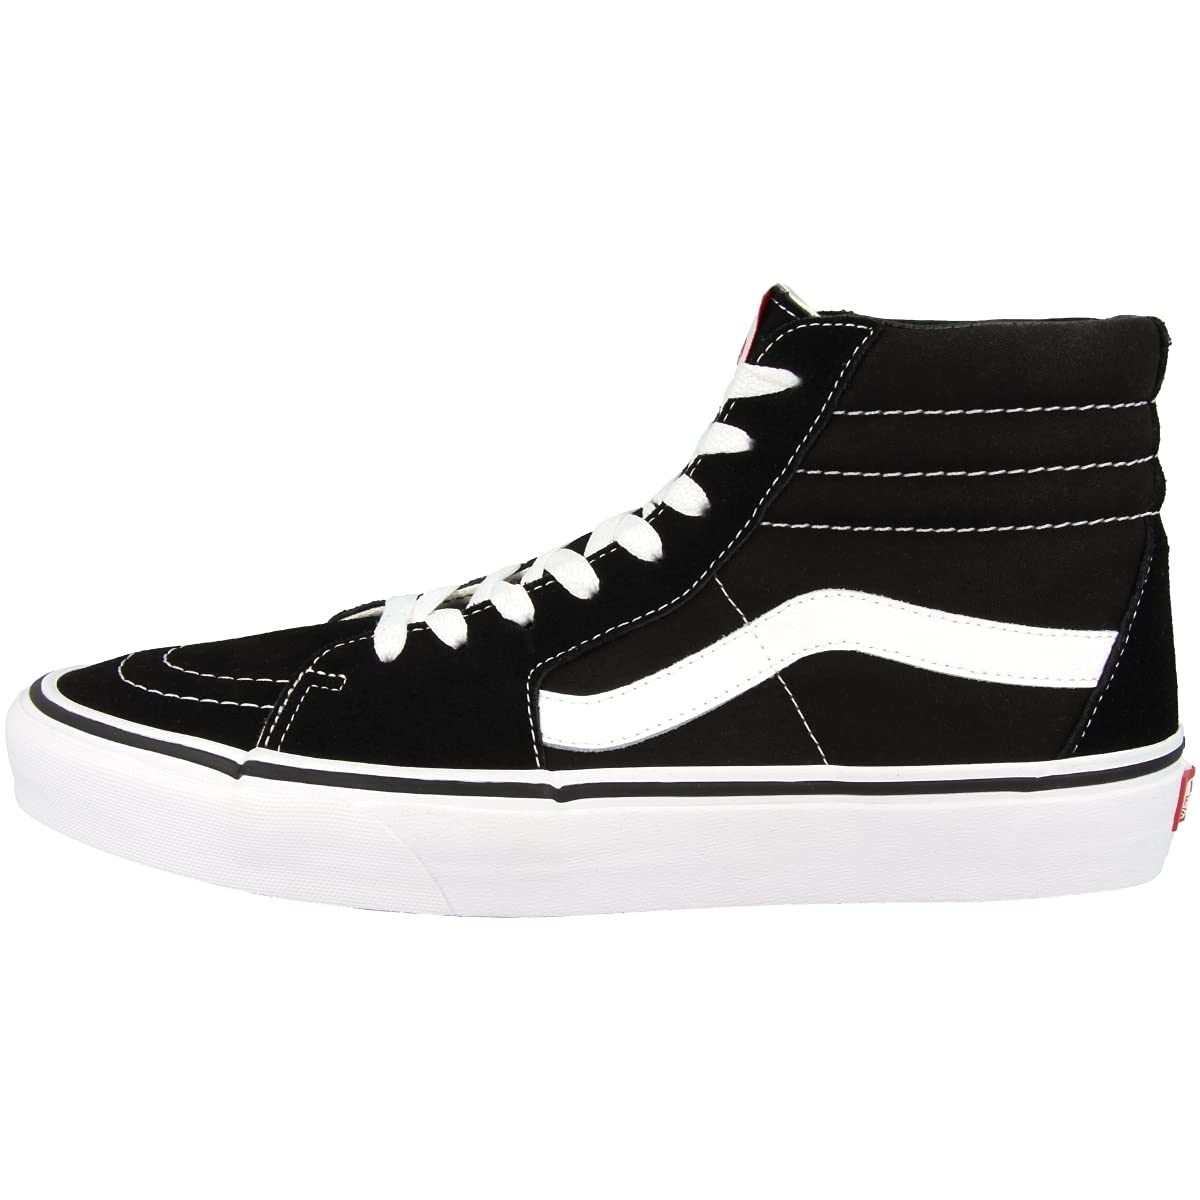 Mua Vans Sk8-Hi Unisex Casual High-Top Skate Shoes, Comfortable And Durable  In Signature Waffle Rubber Sole Trên Amazon Mỹ Chính Hãng 2023 | Giaonhan247